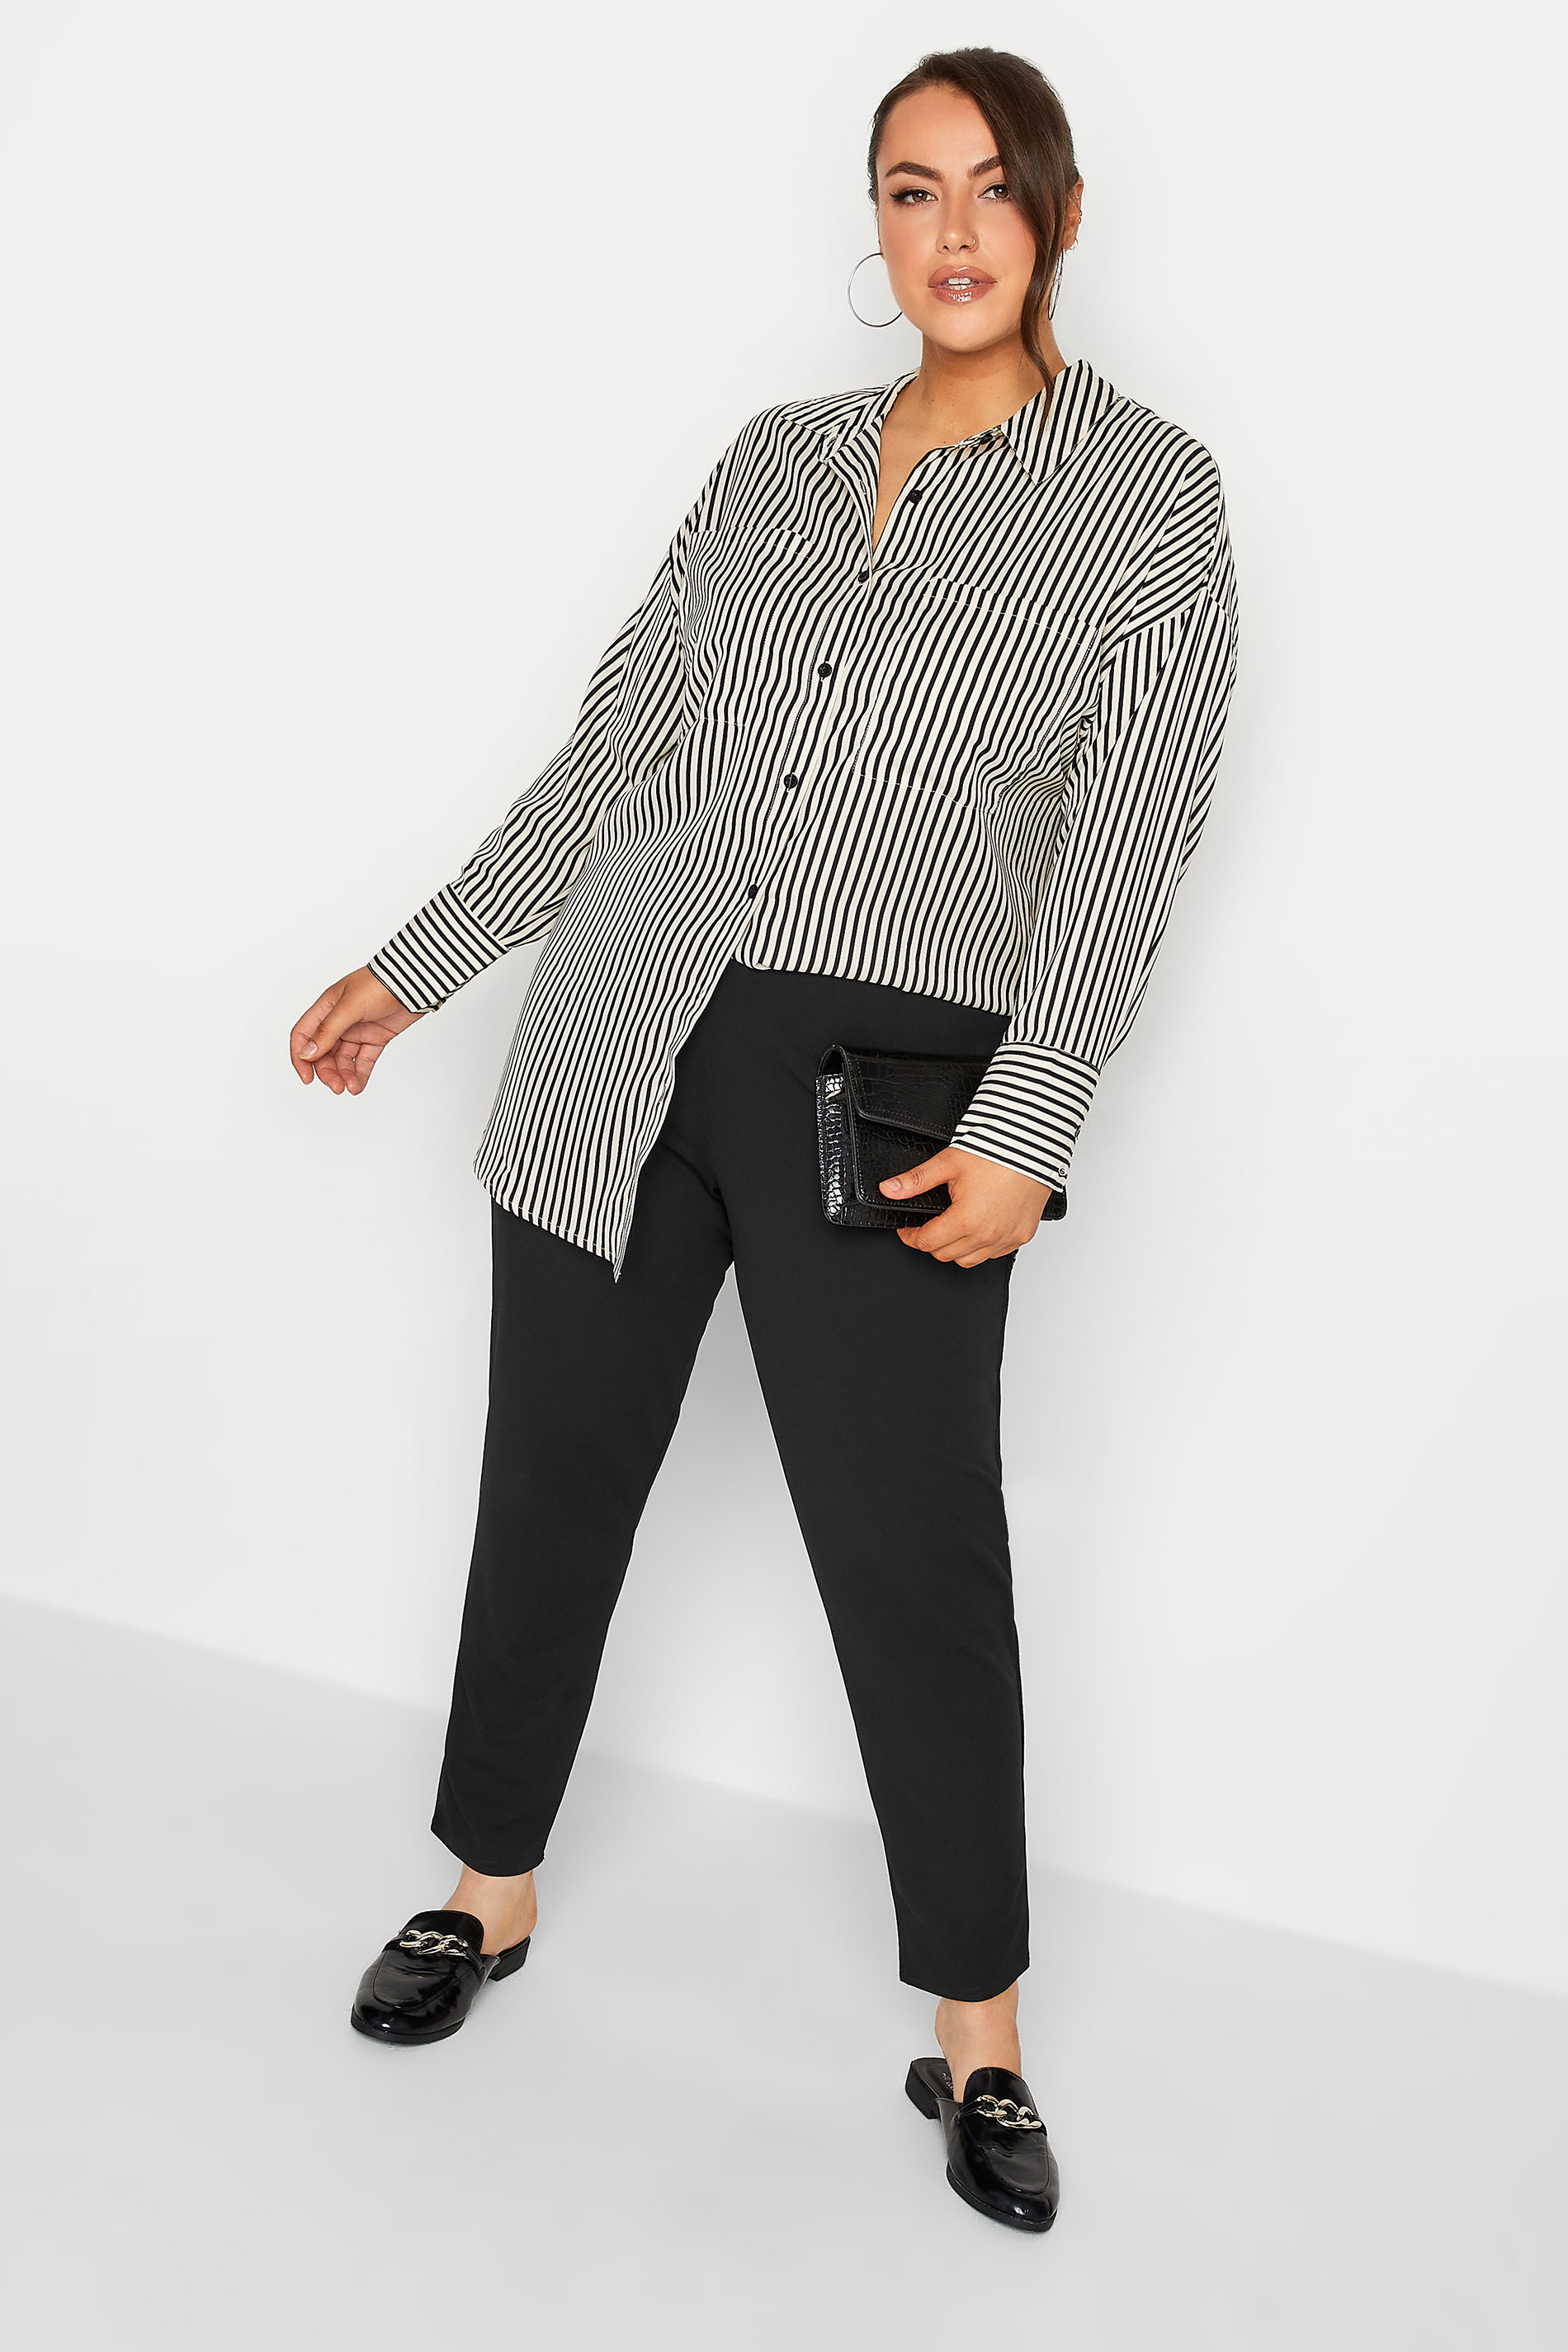 Eileen Fisher Petite High-Waisted Tapered Ankle Pants | Zappos.com